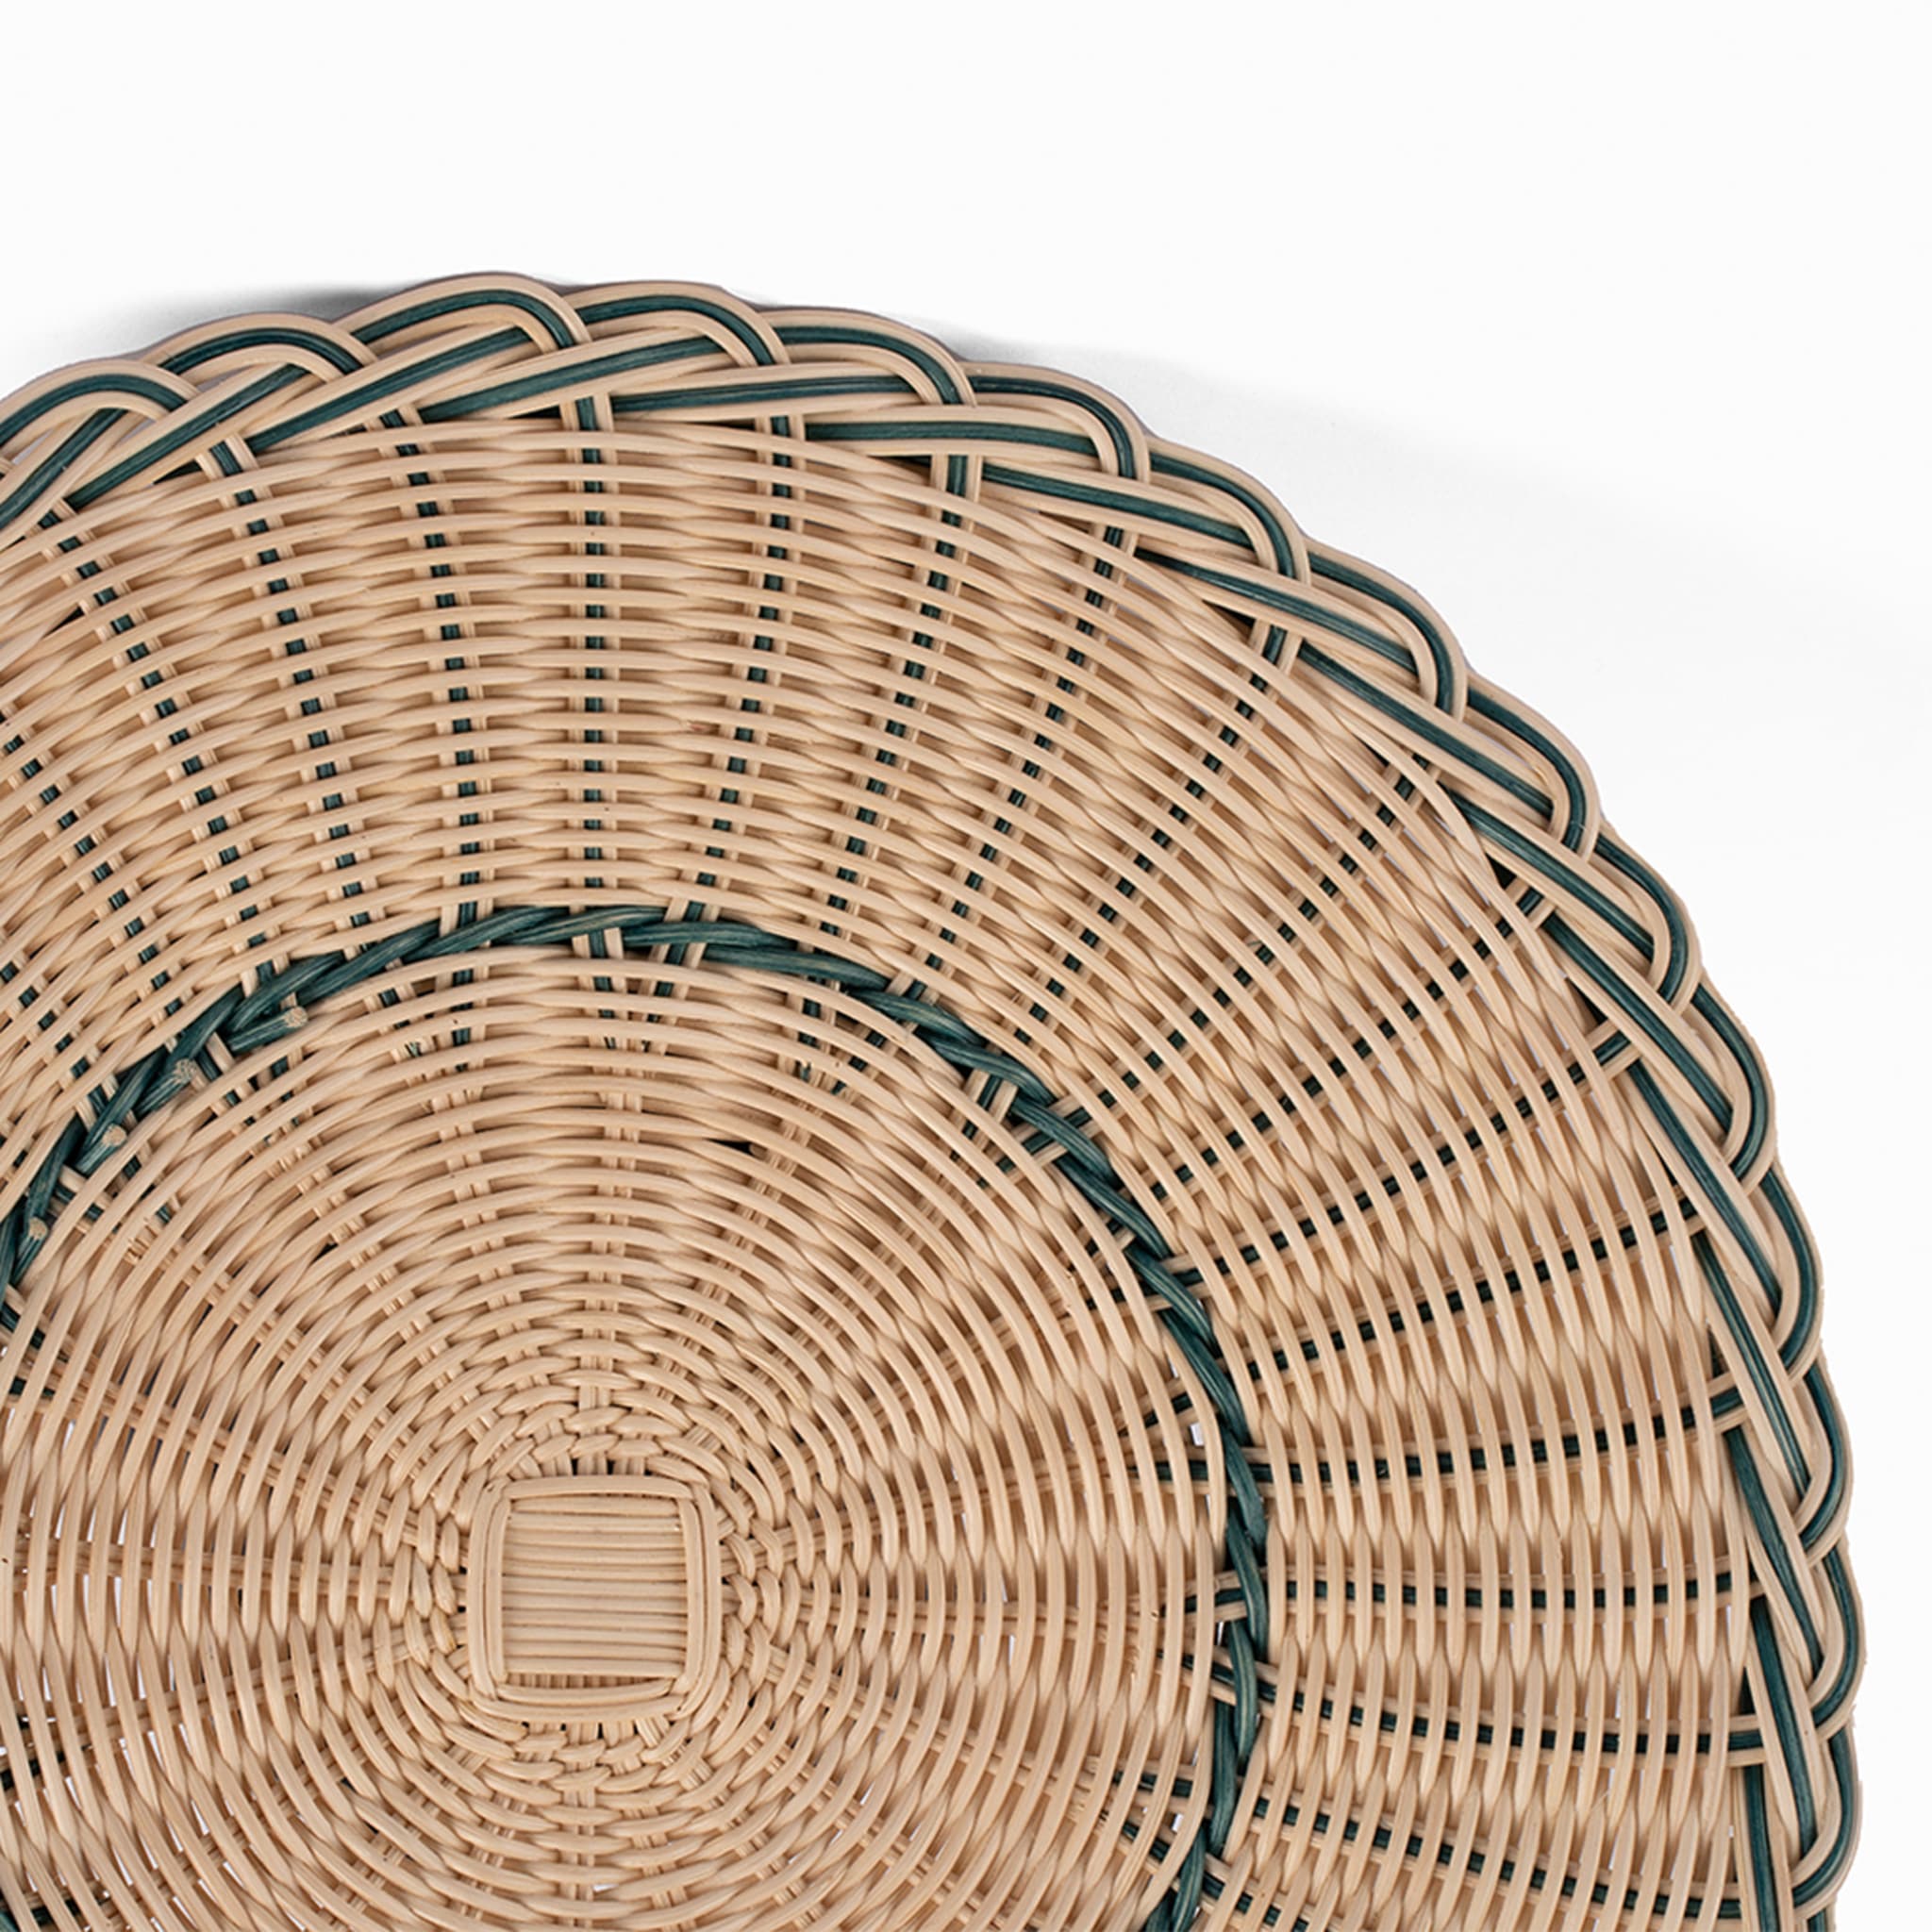 Dalia Blue and Natural Wicker Placeholder - Alternative view 1